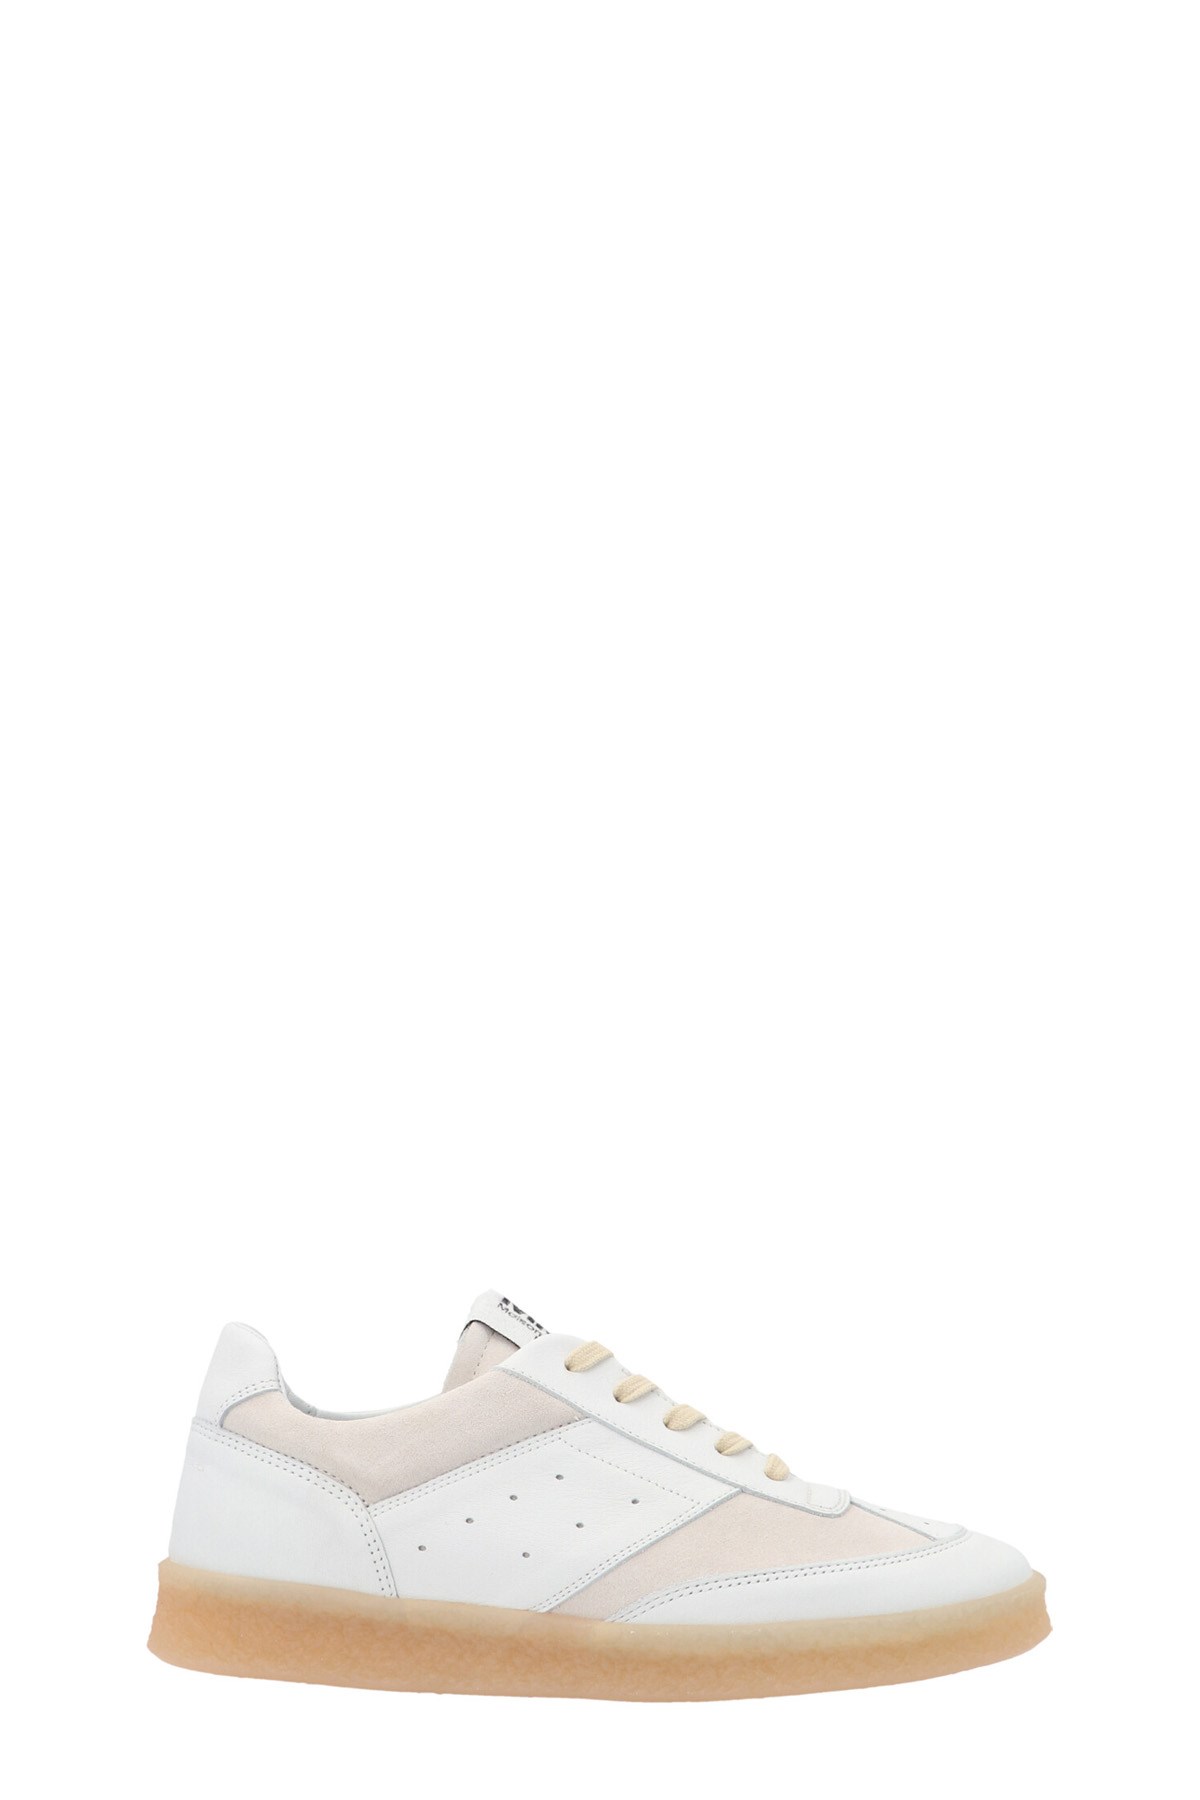 MM6 MAISON MARGIELA Suede Detail Leather Sneakers